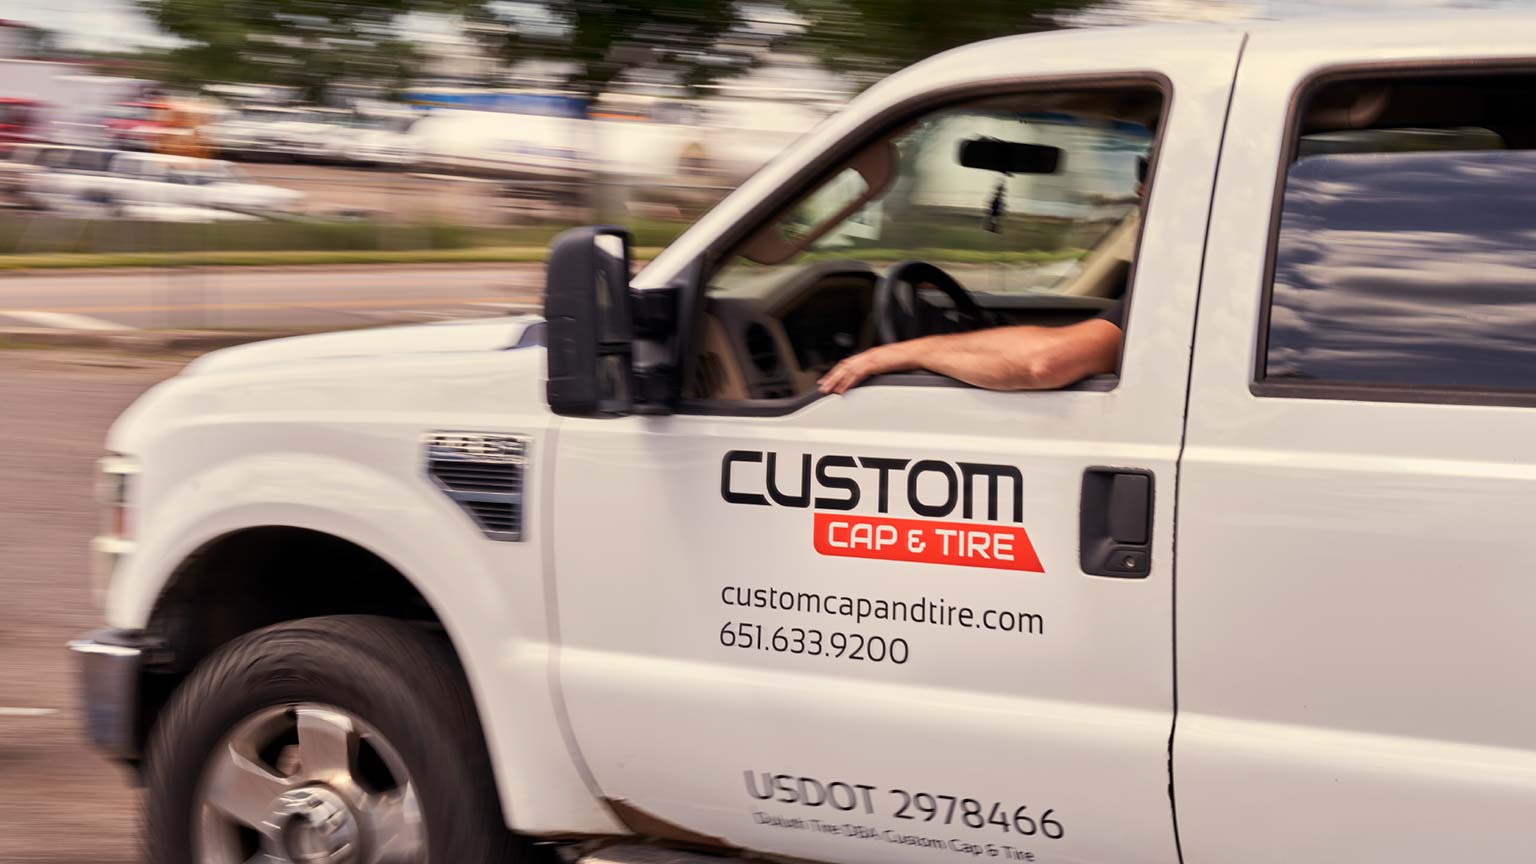 The Custom Cap and Tire logo on the side of a truck.